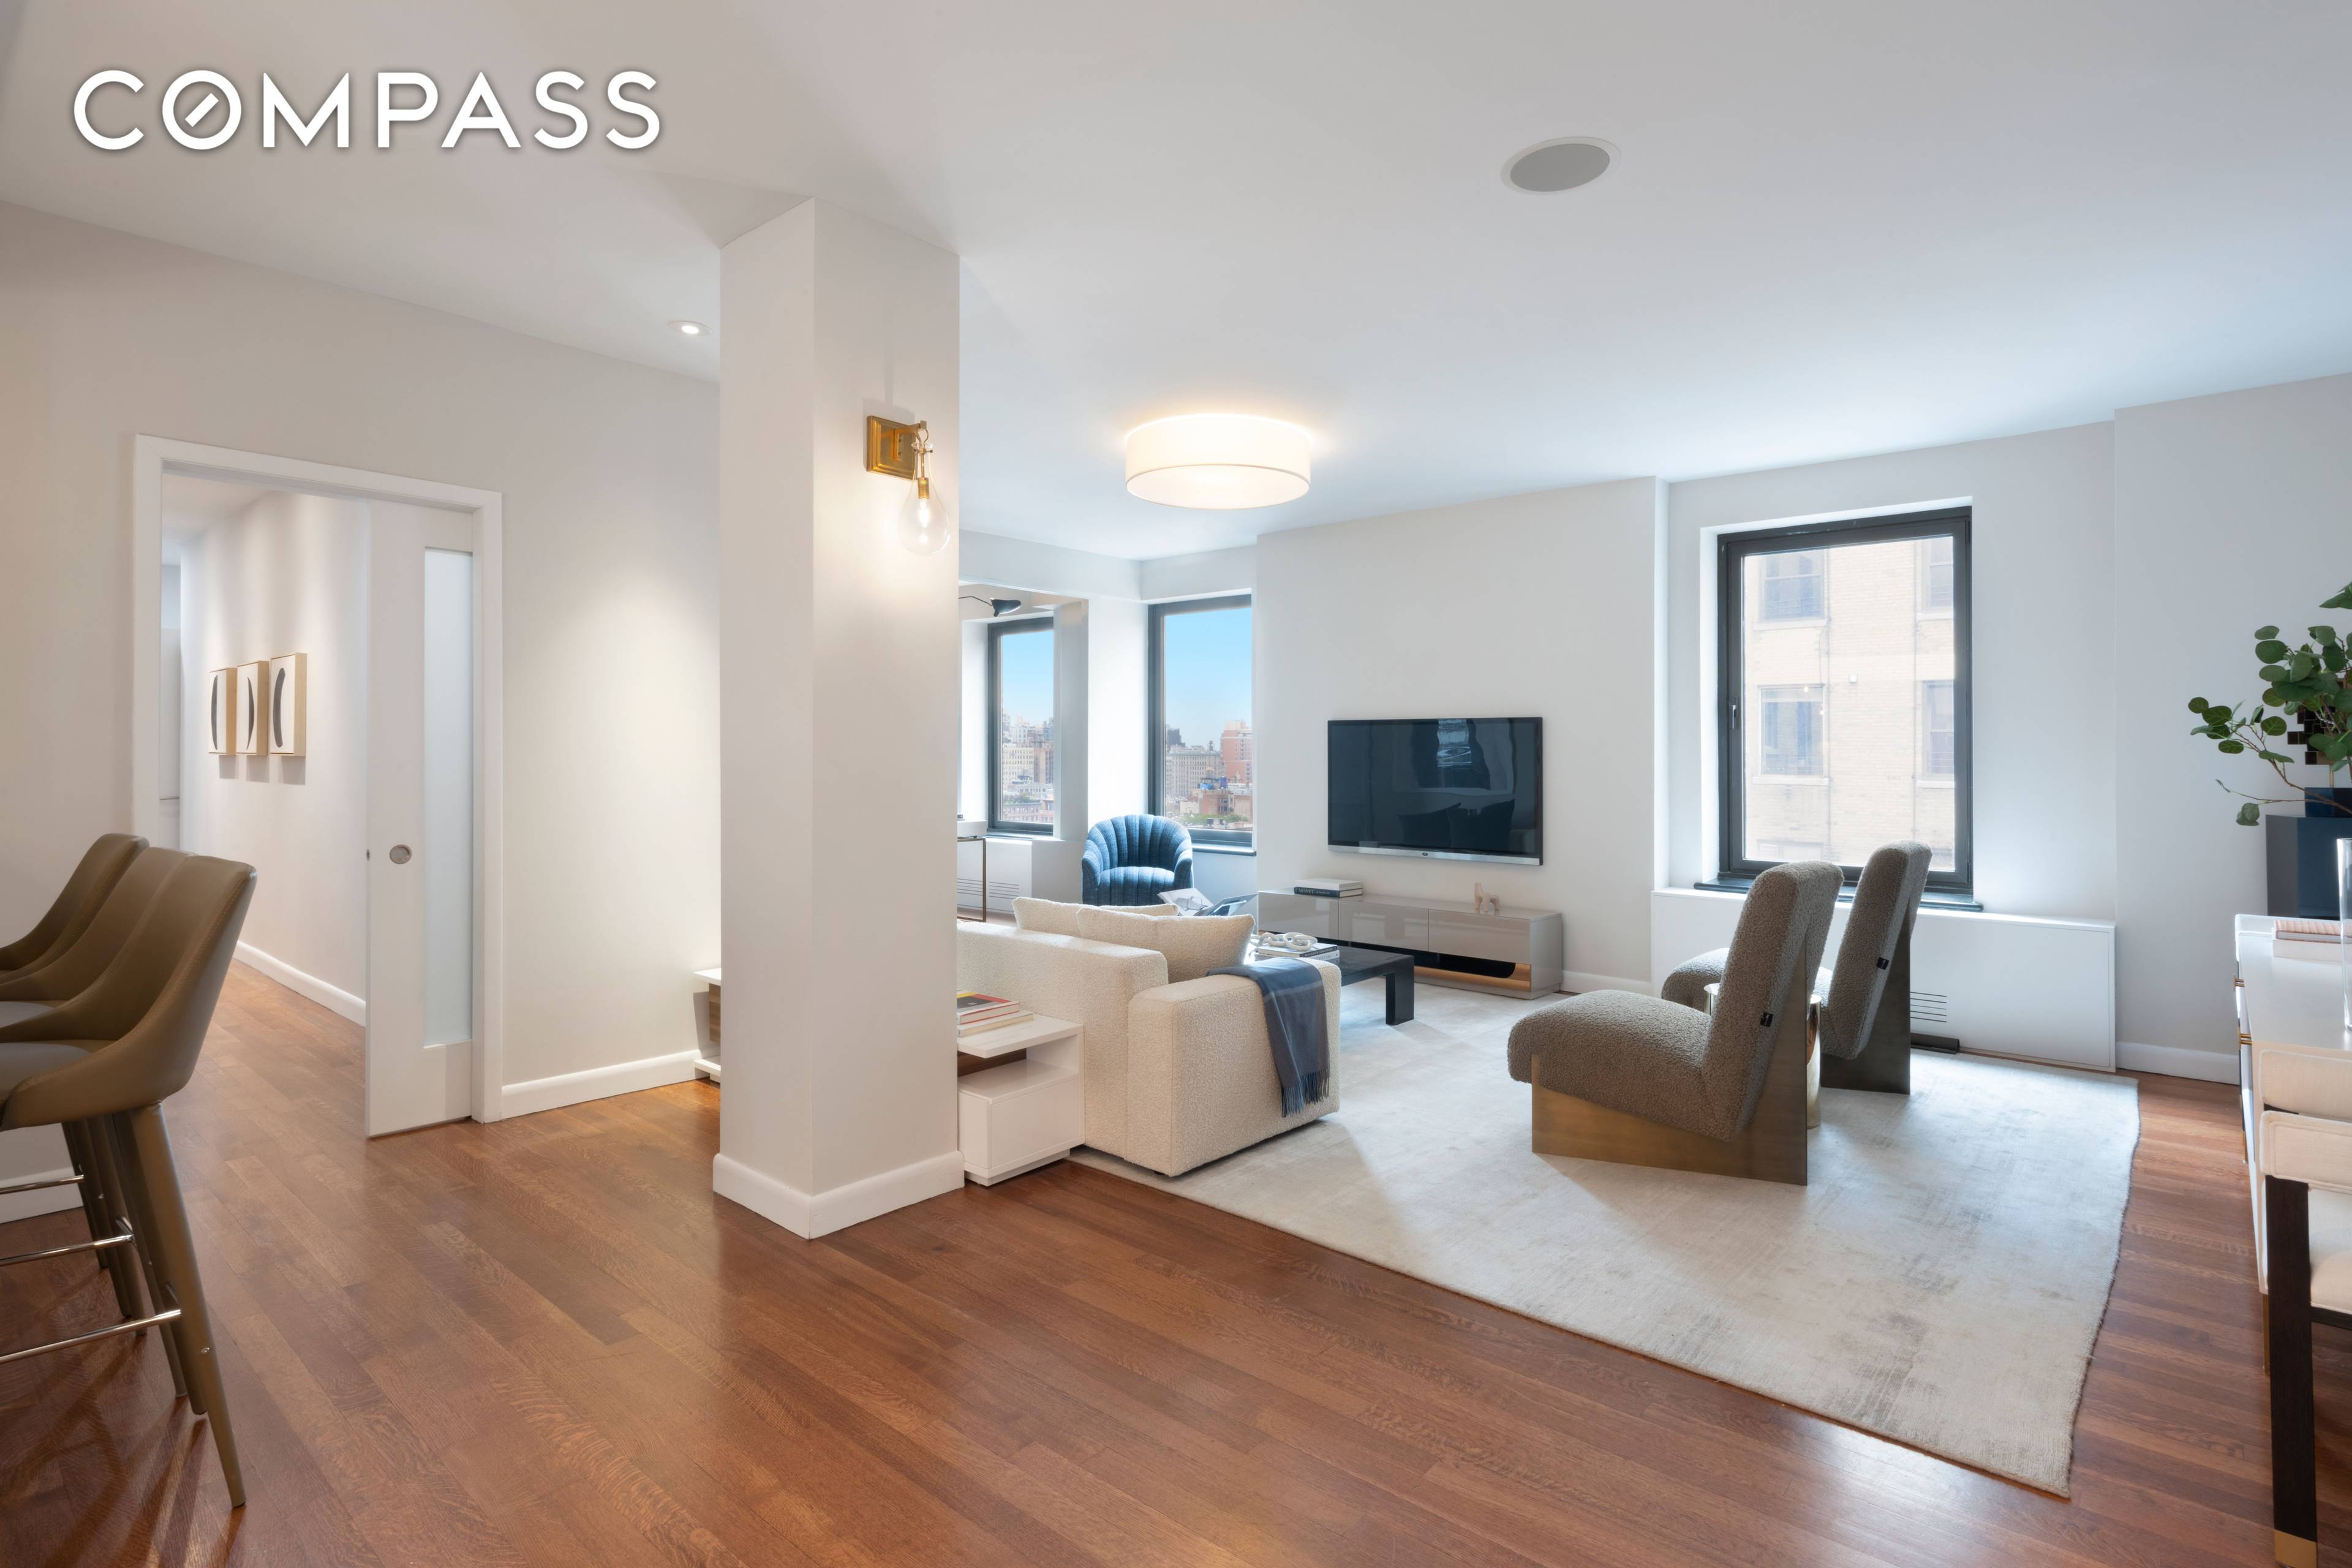 . Contract out on 10F A unique CPW Loft like 4 bedroom Den Guest Room with 5 baths with all modern updates.